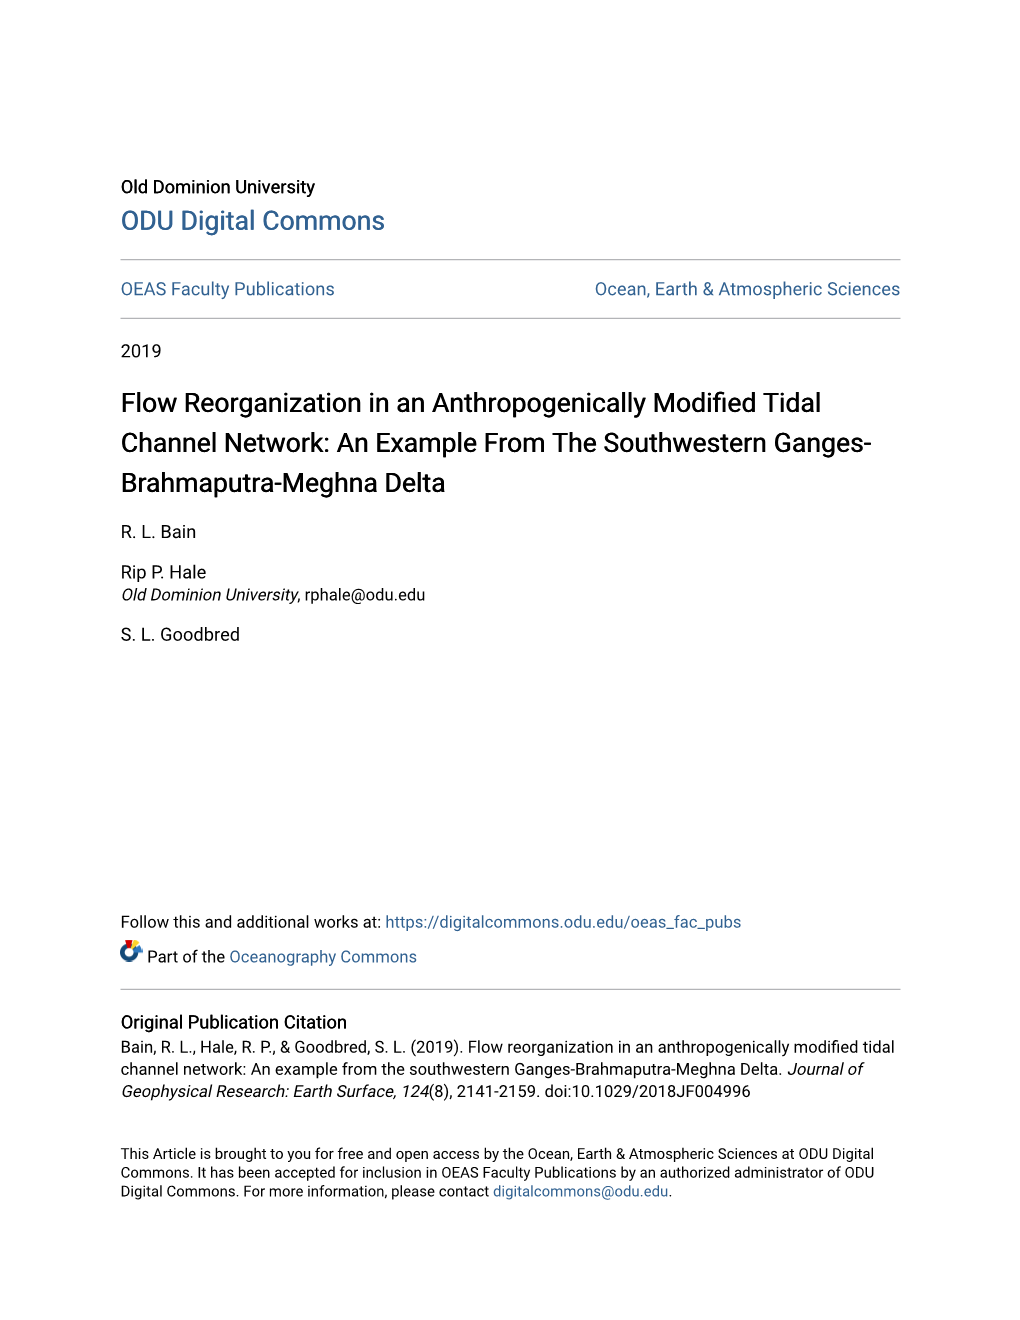 Flow Reorganization in an Anthropogenically Modified Tidal Channel Network: an Example from the Southwestern Ganges- Brahmaputra-Meghna Delta